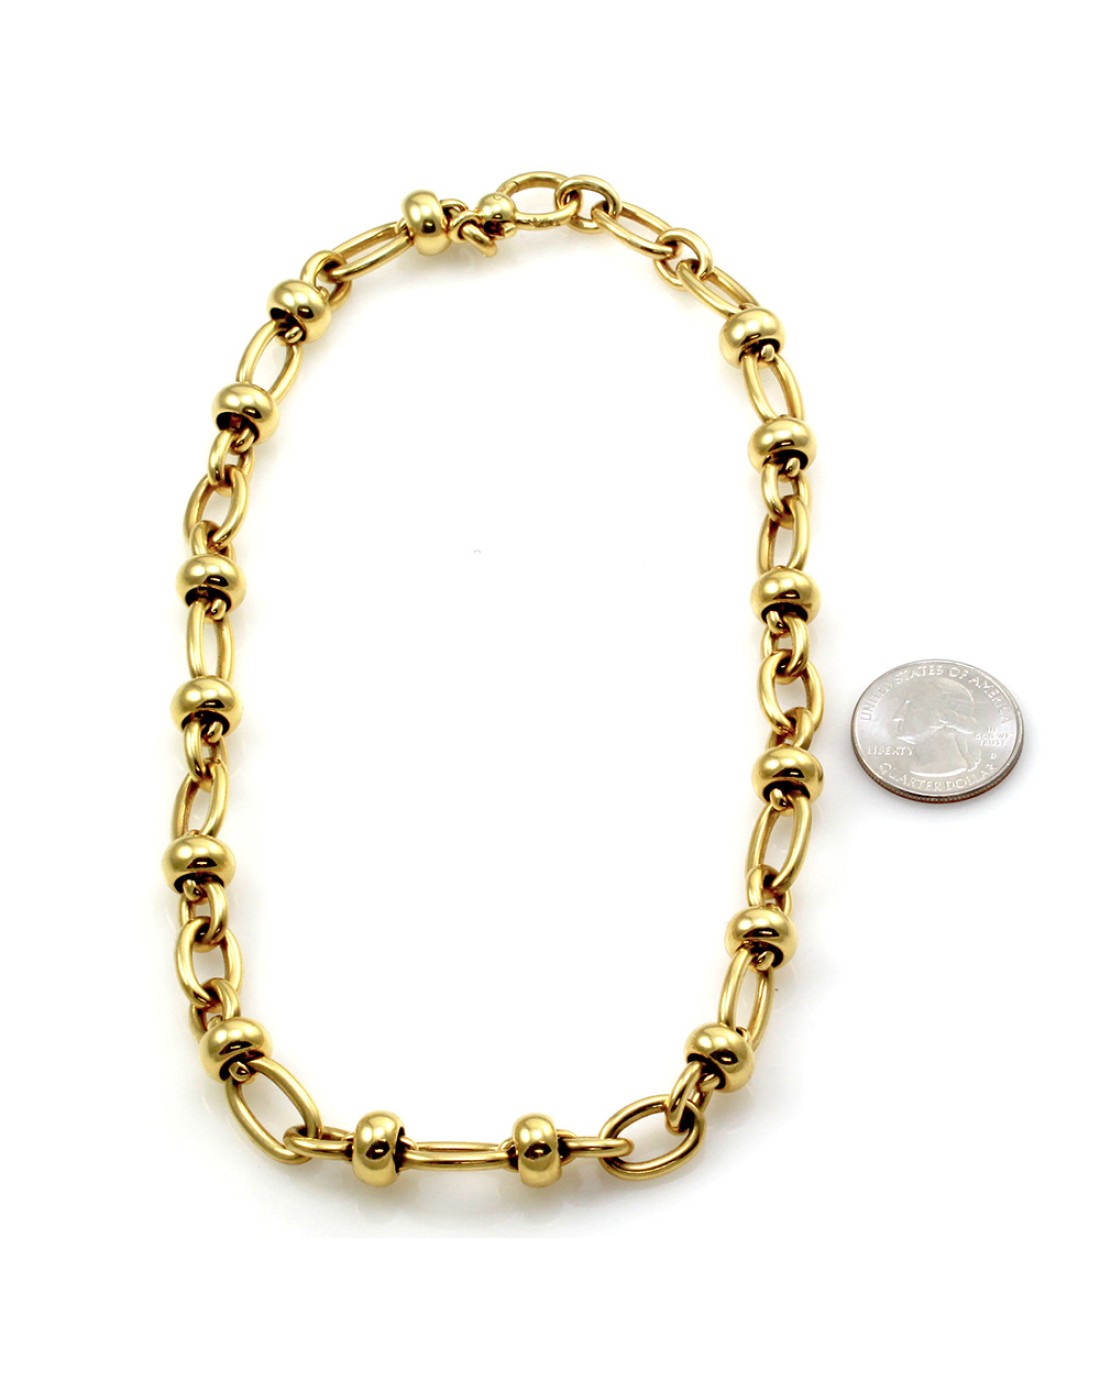 Pomellato Statement Chain Necklace in 18K Yellow Gold